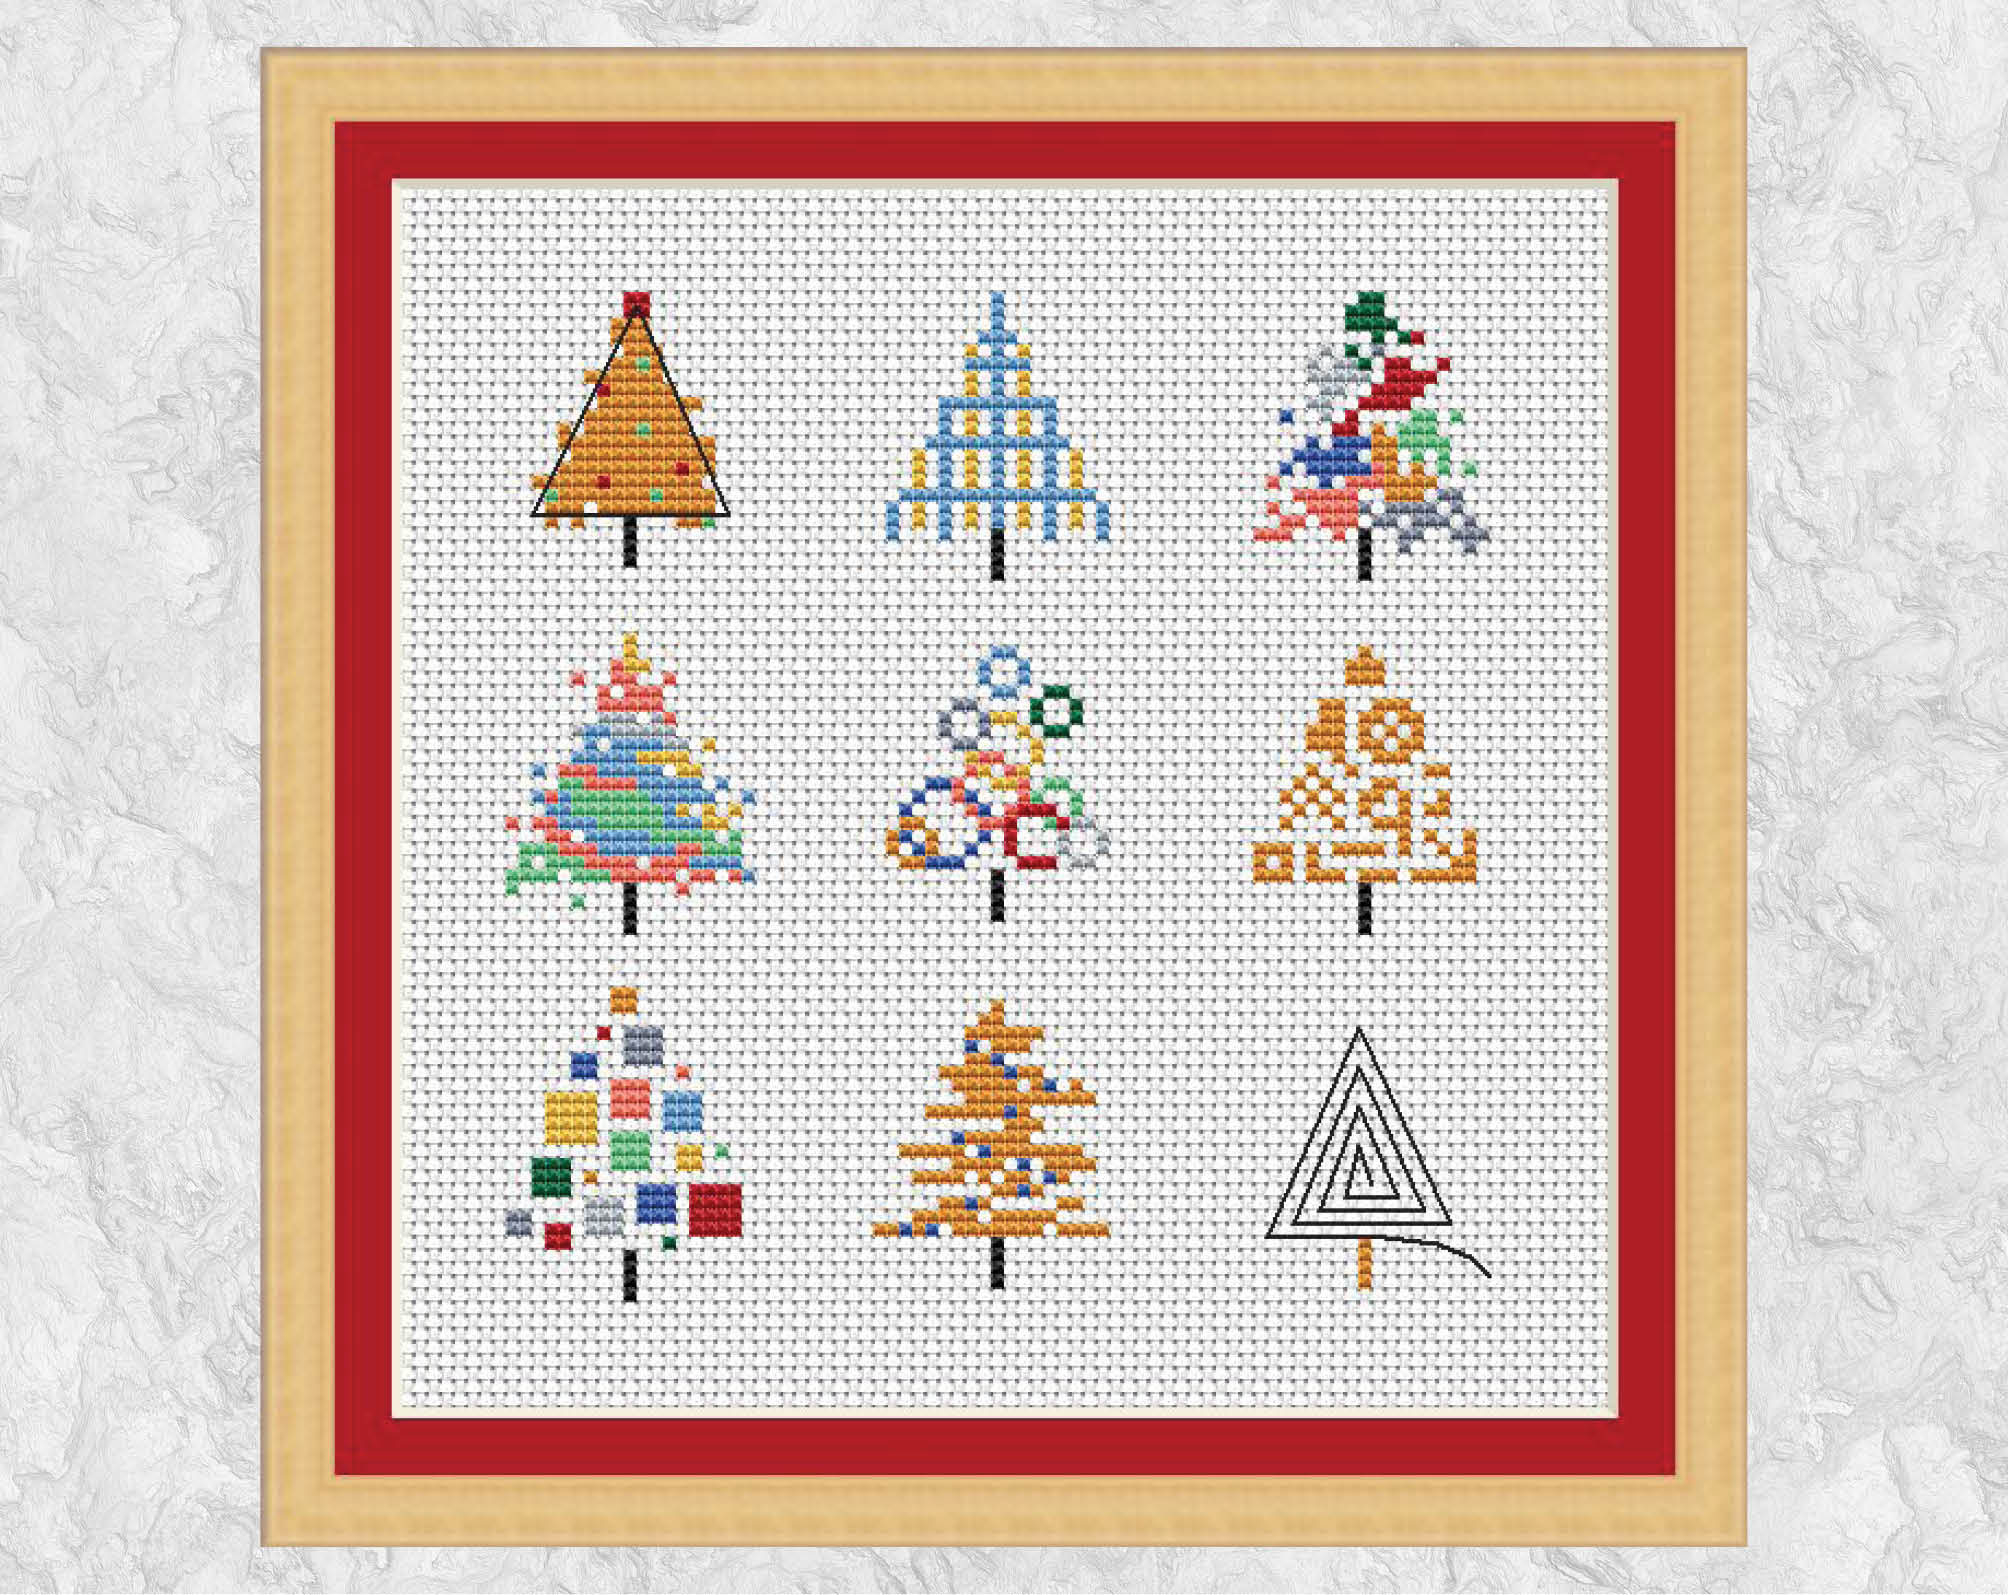 Card Embroidery Patterns Modern Christmas Cross Stitch Pattern Christmas Card Motifs Cute Mini Christmas Trees Small Easy Simple Fun Xmas Instant Download Pdf